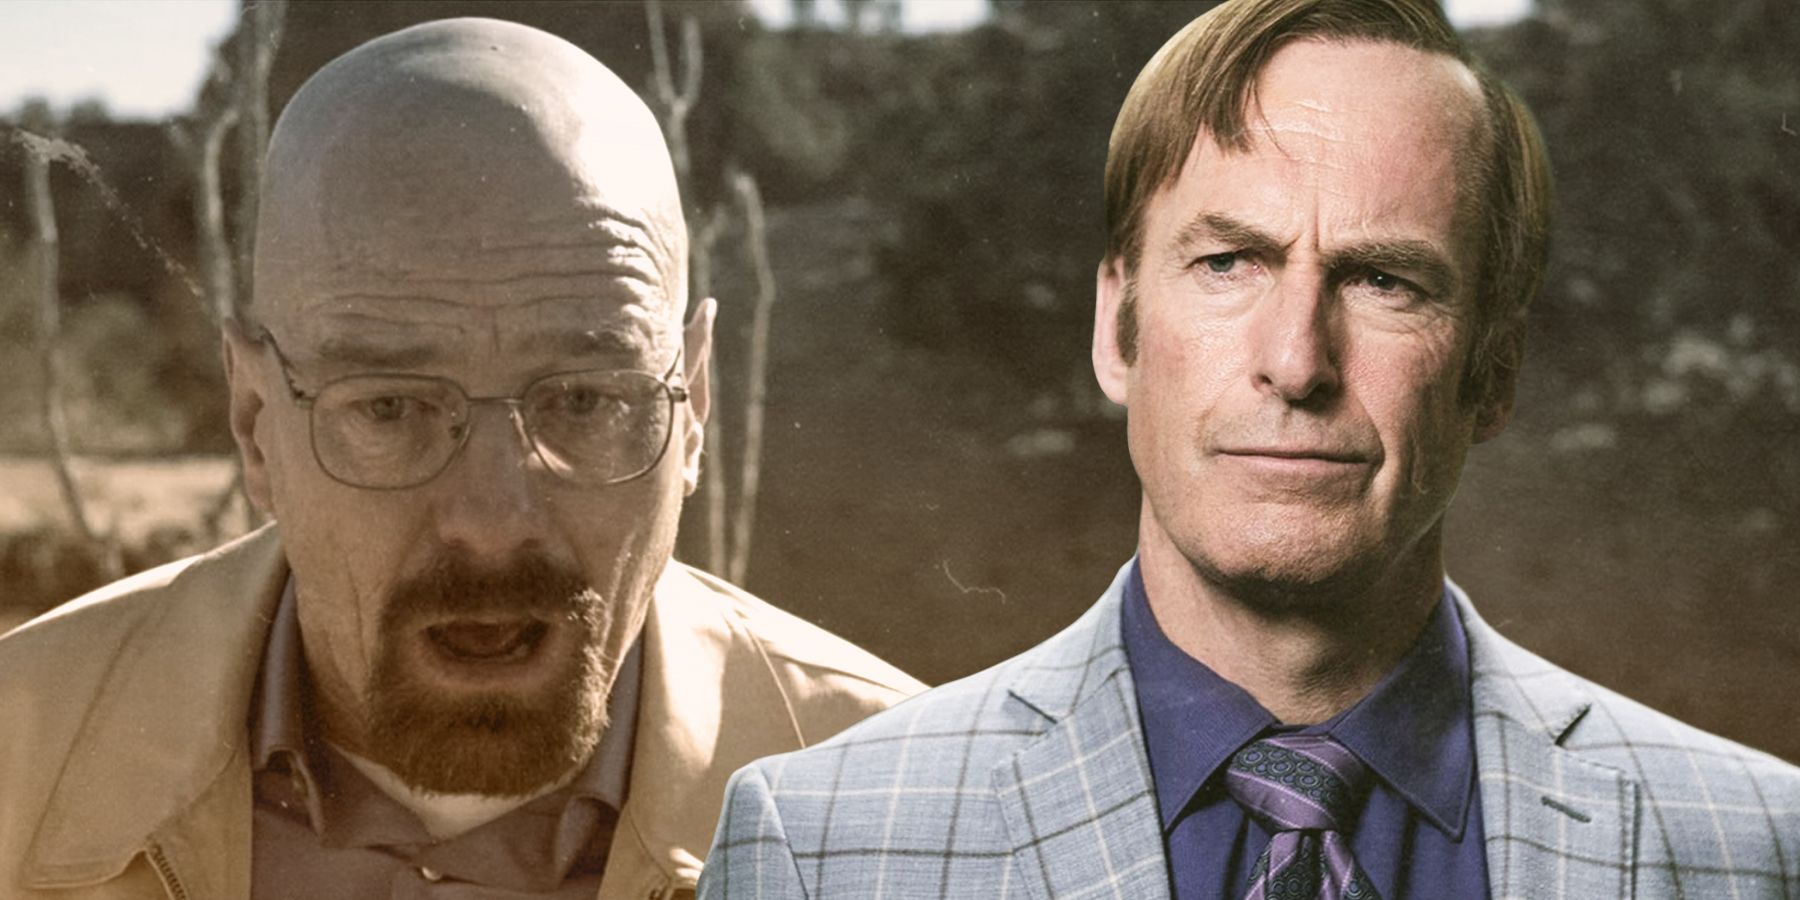 Walter White Isn't the Breaking Bad Universe's Protagonist - Jimmy McGill Is